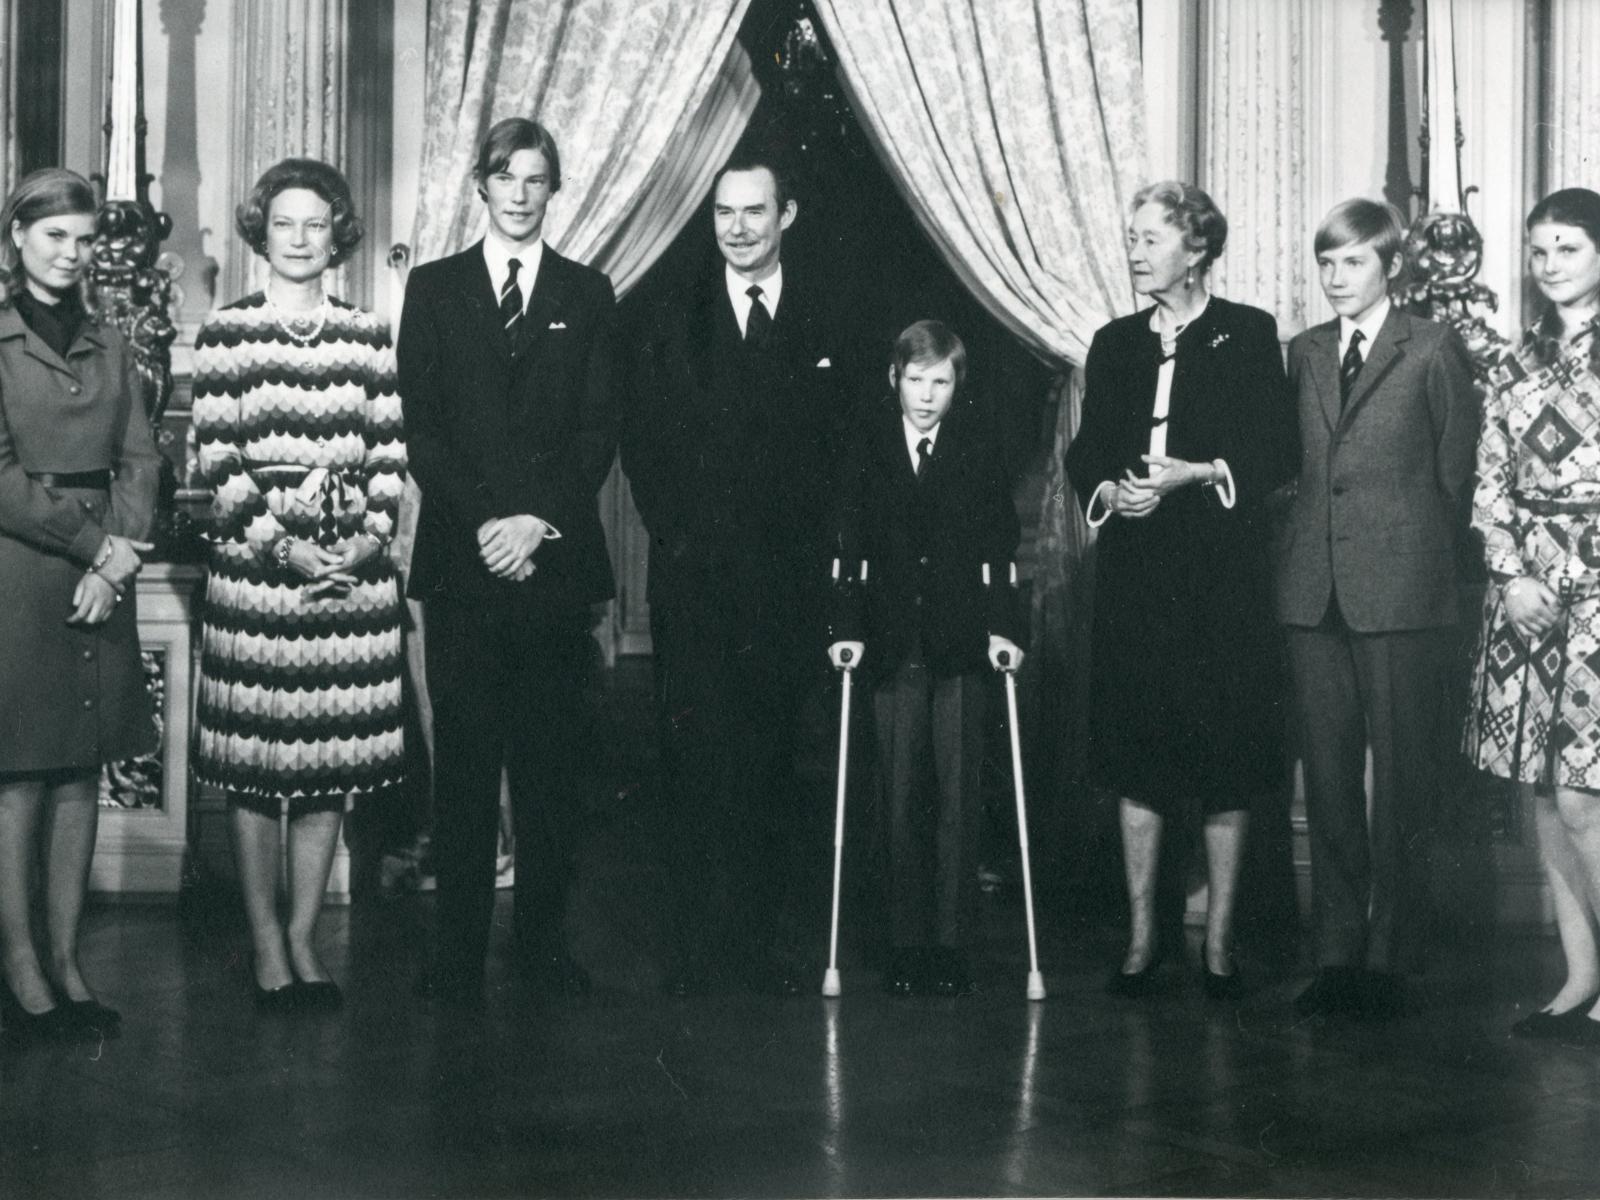 The Grand Ducal Family in 1973